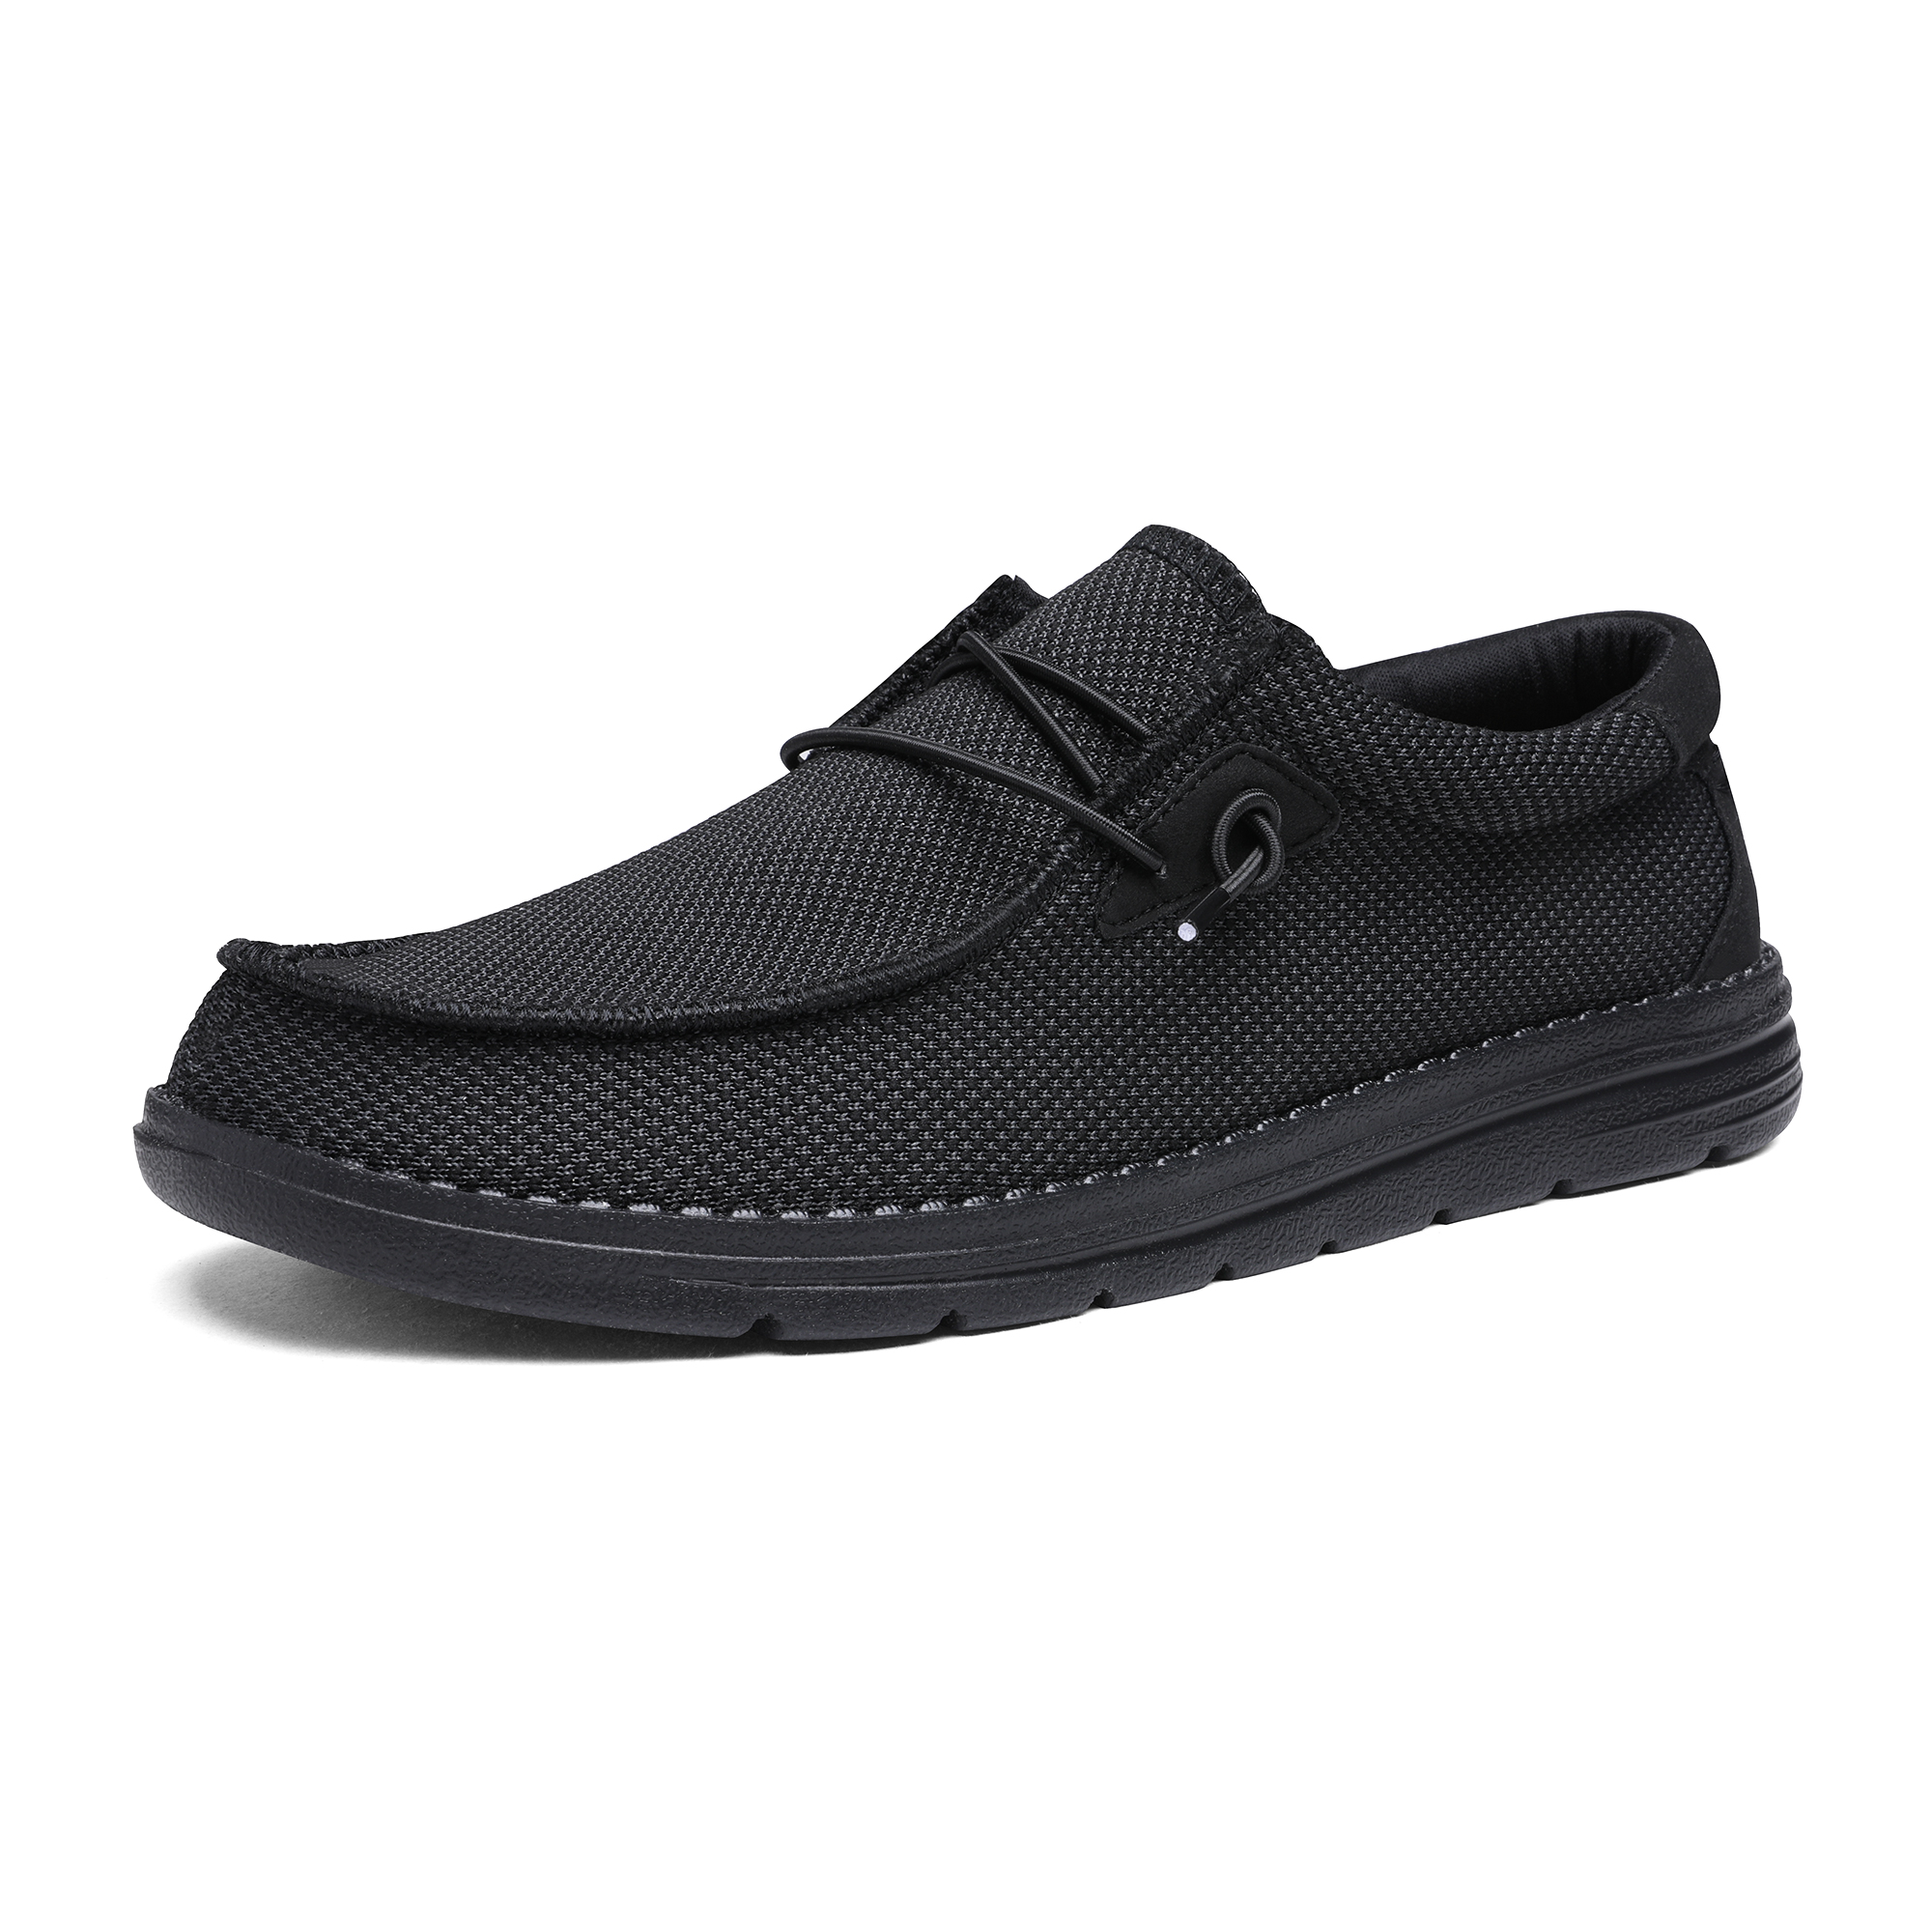 Bruno Marc Men's Comfort Tennis Shoes Casual Slip-on Loafers Lightweight Stretch Shoes Outdoor Indoor Sneakers BLS211 BLACK Size 7 - image 1 of 5